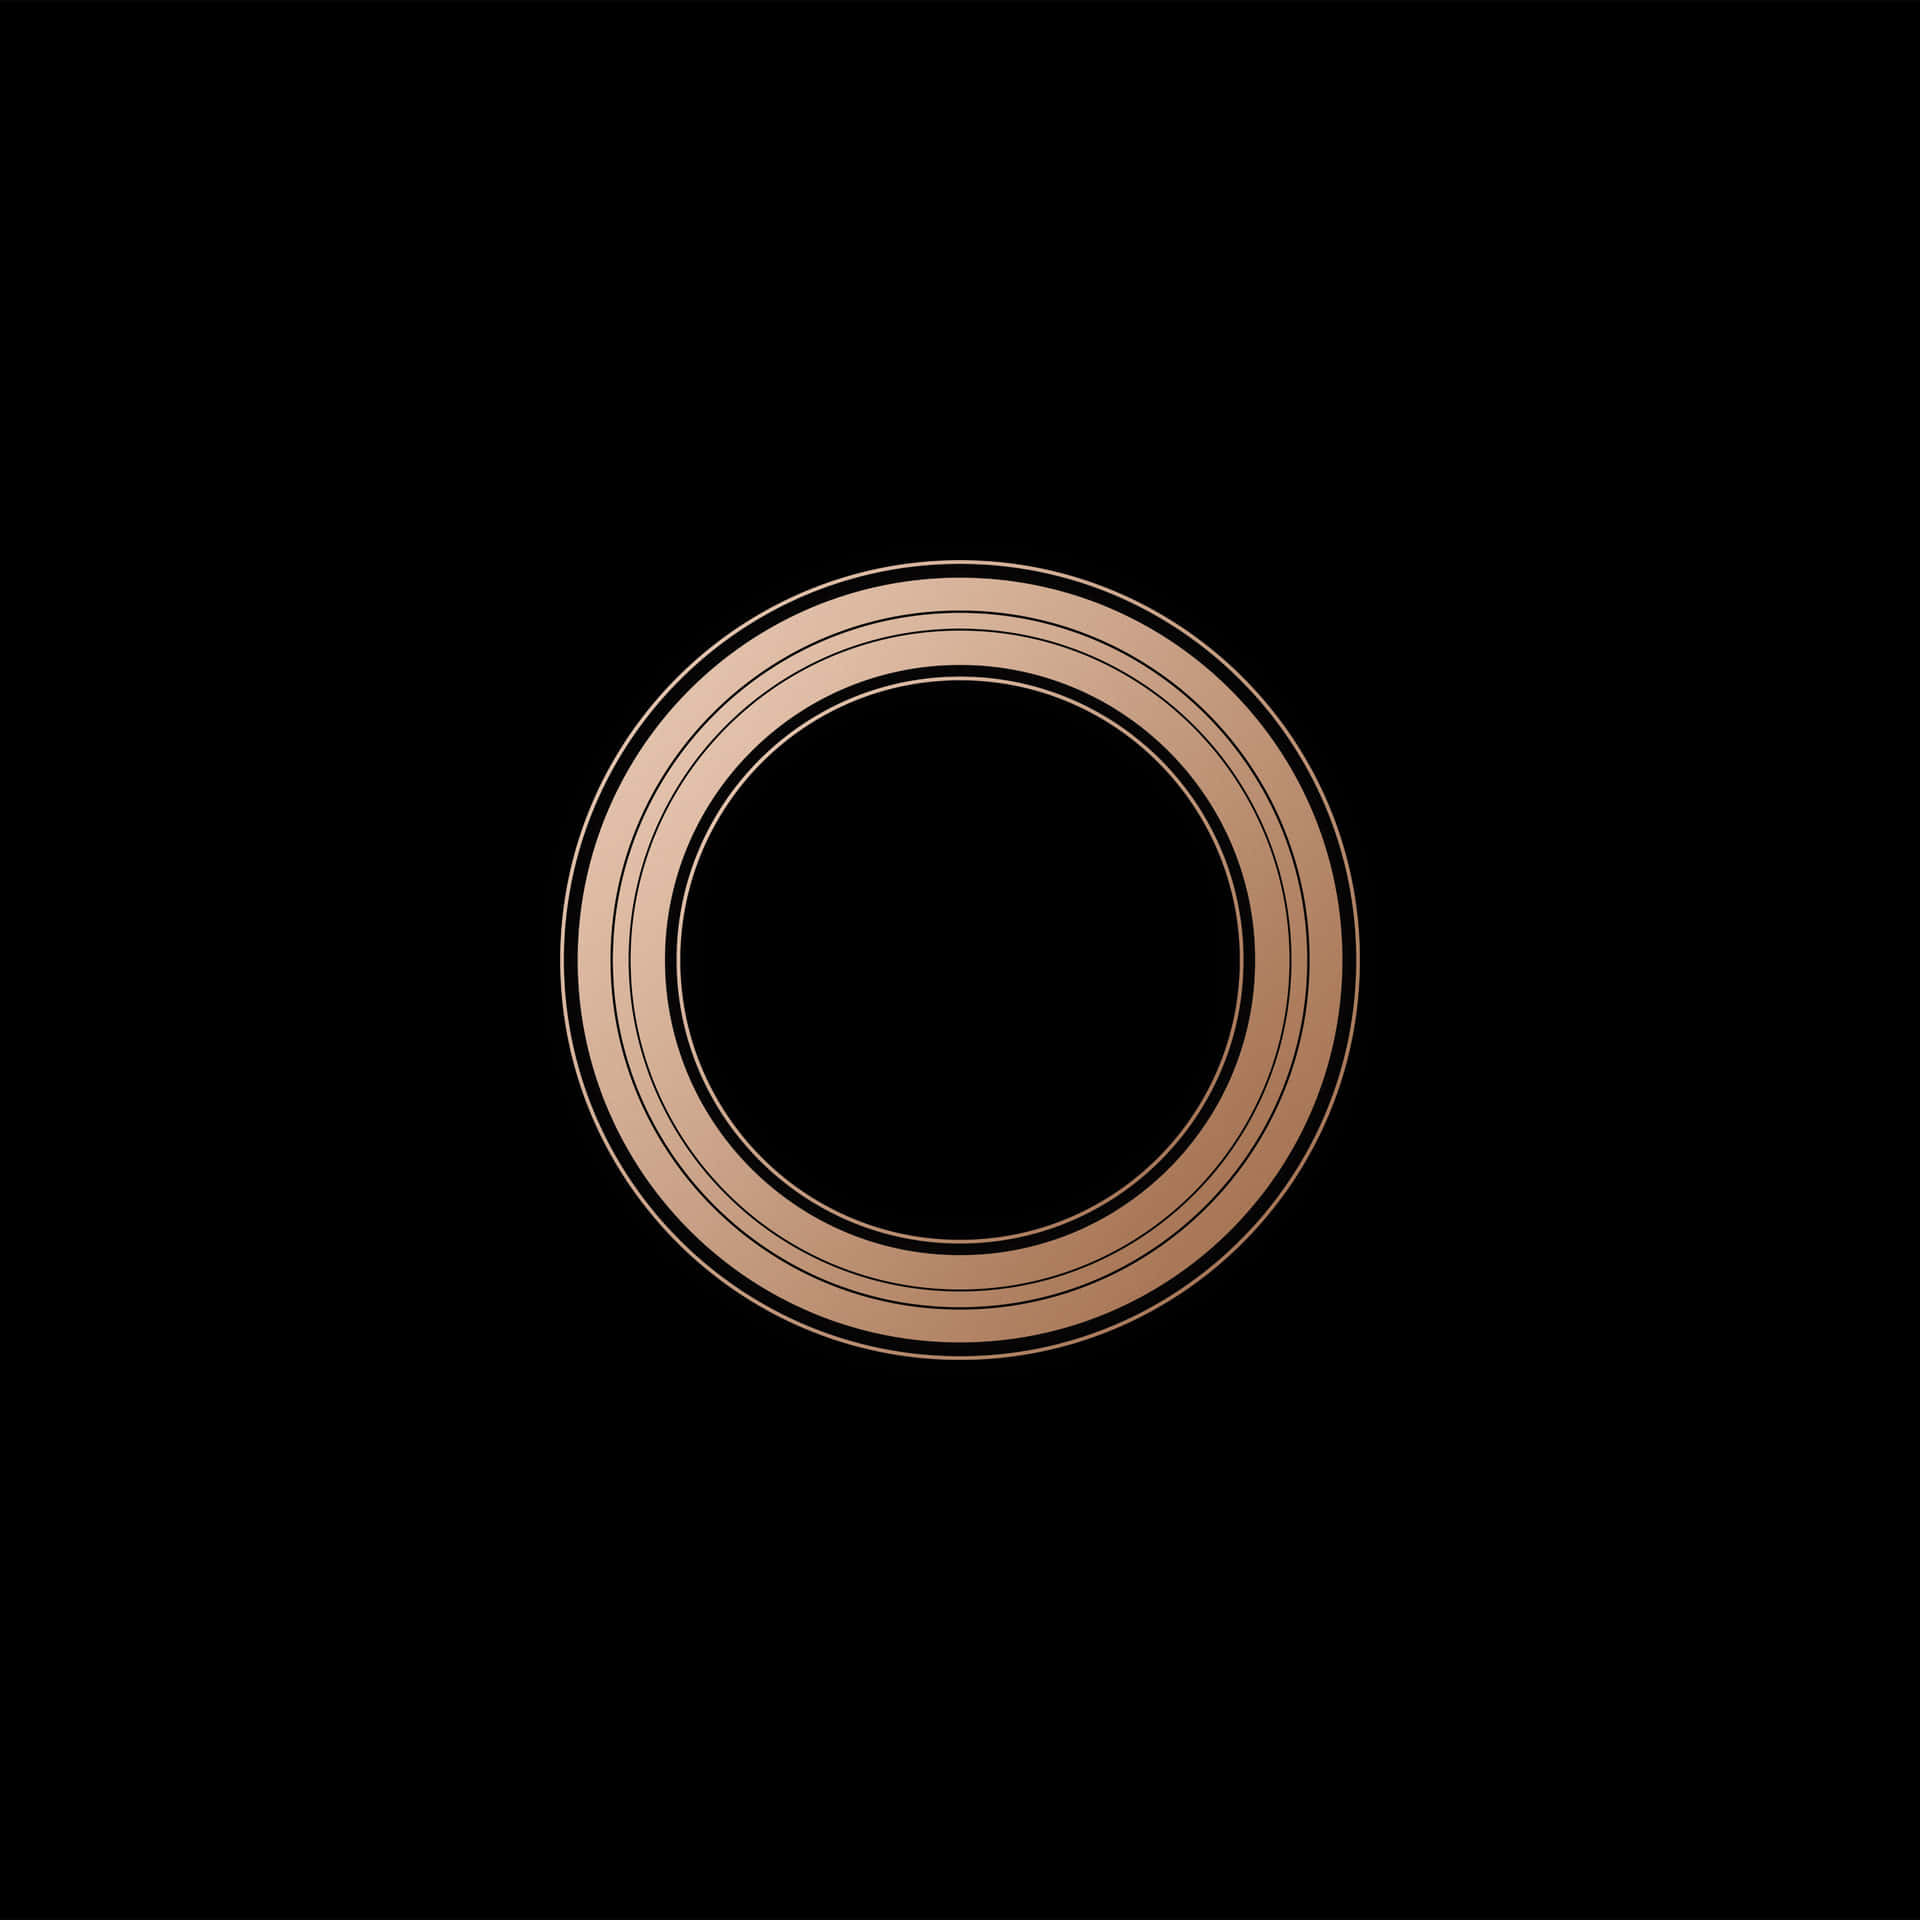 Abstract Copper Ringon Black Background Wallpaper